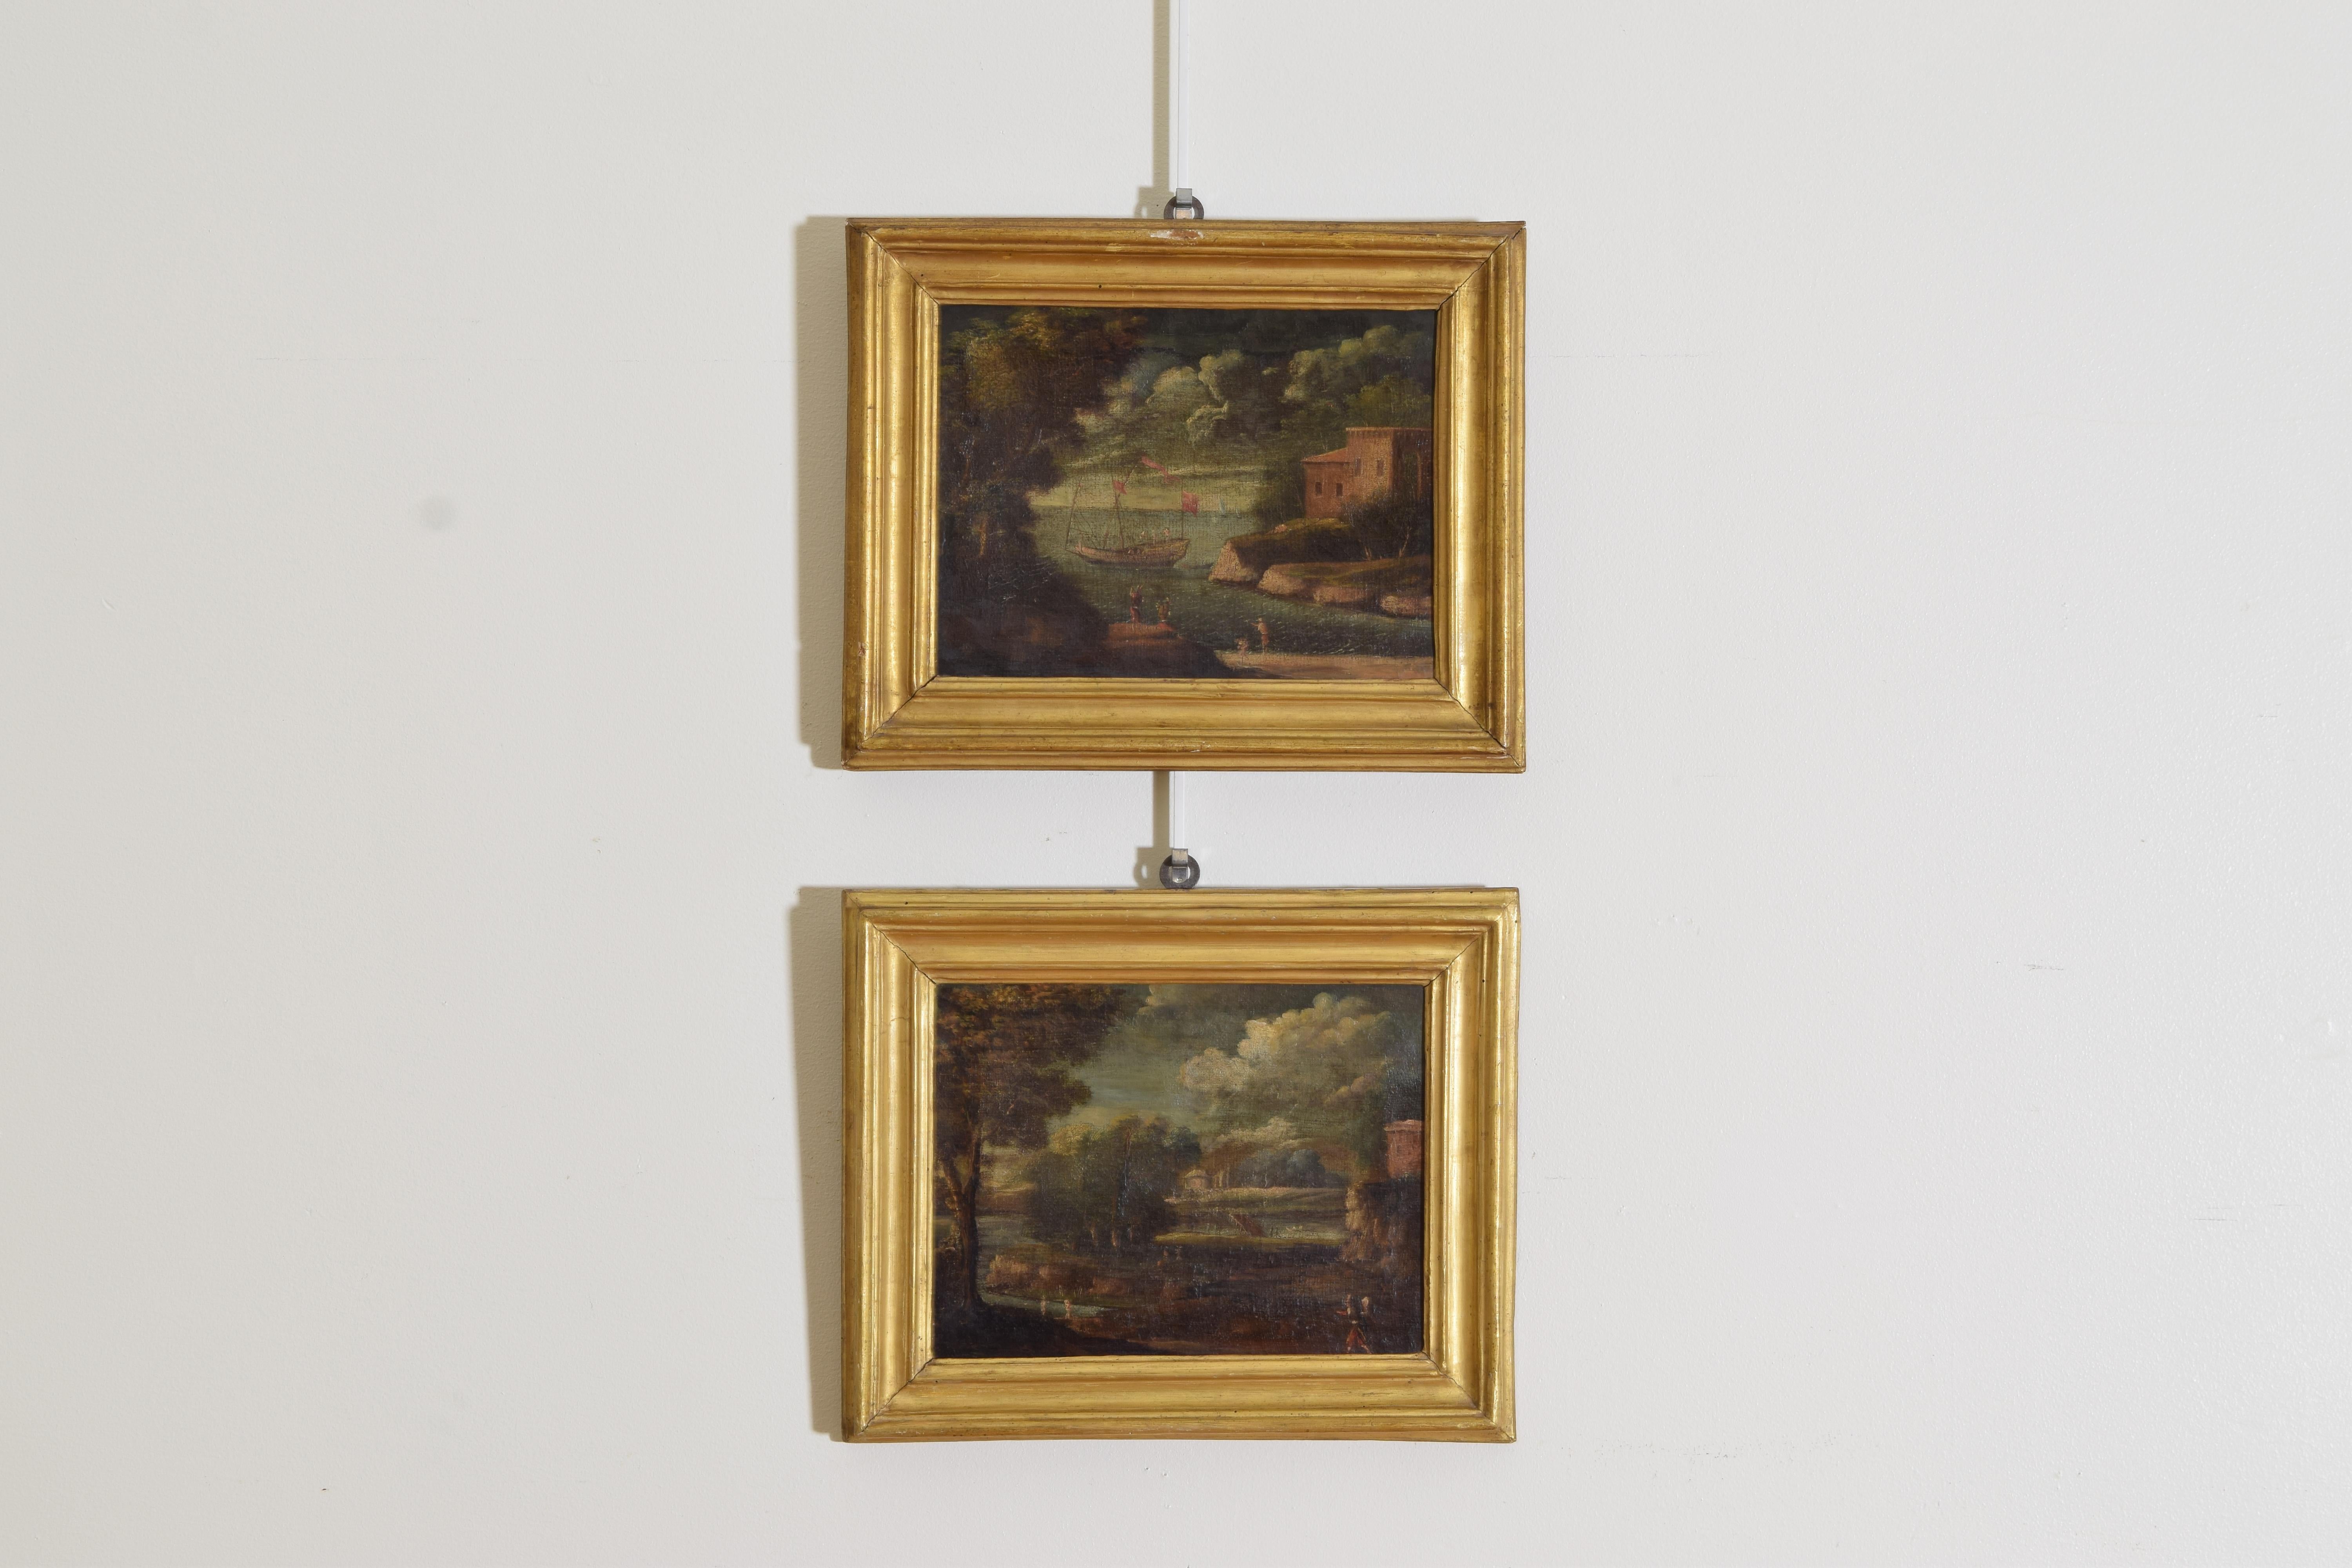 The paintings, respectively, of a harbor with a fortress and ships and a landscape with ruins and figures, in period giltwood frames